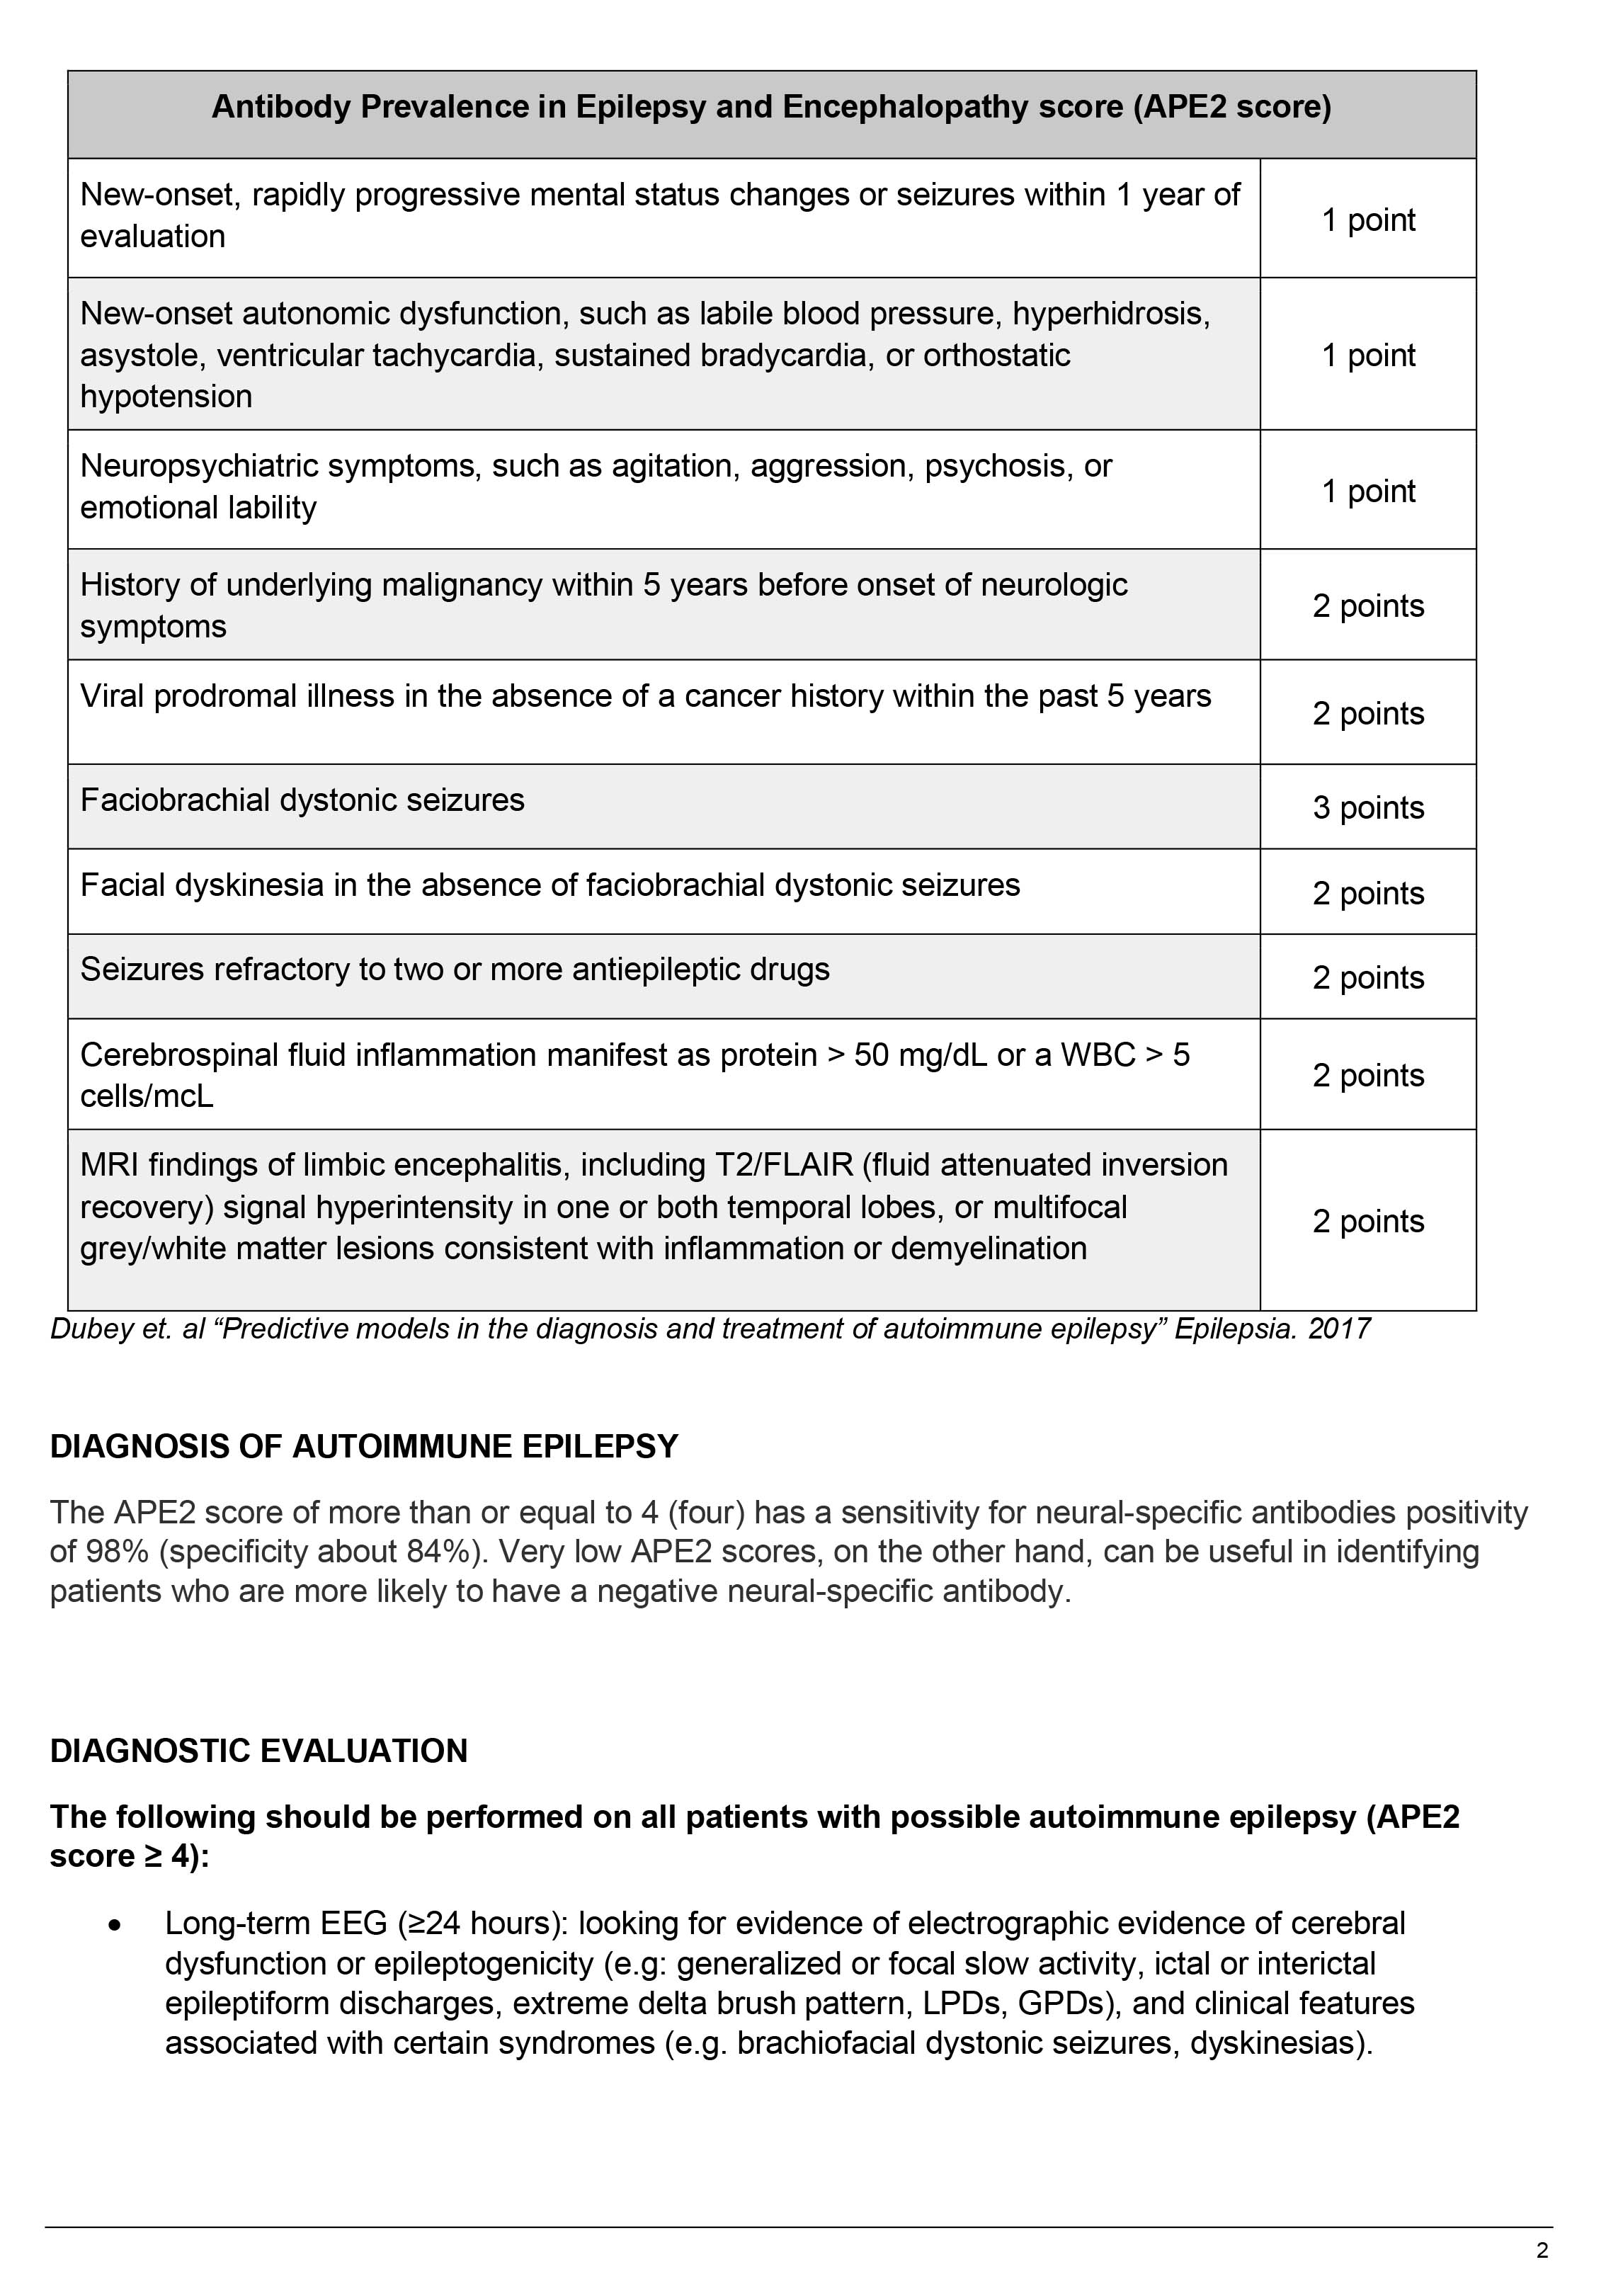 Clinical Pathways Document Image2